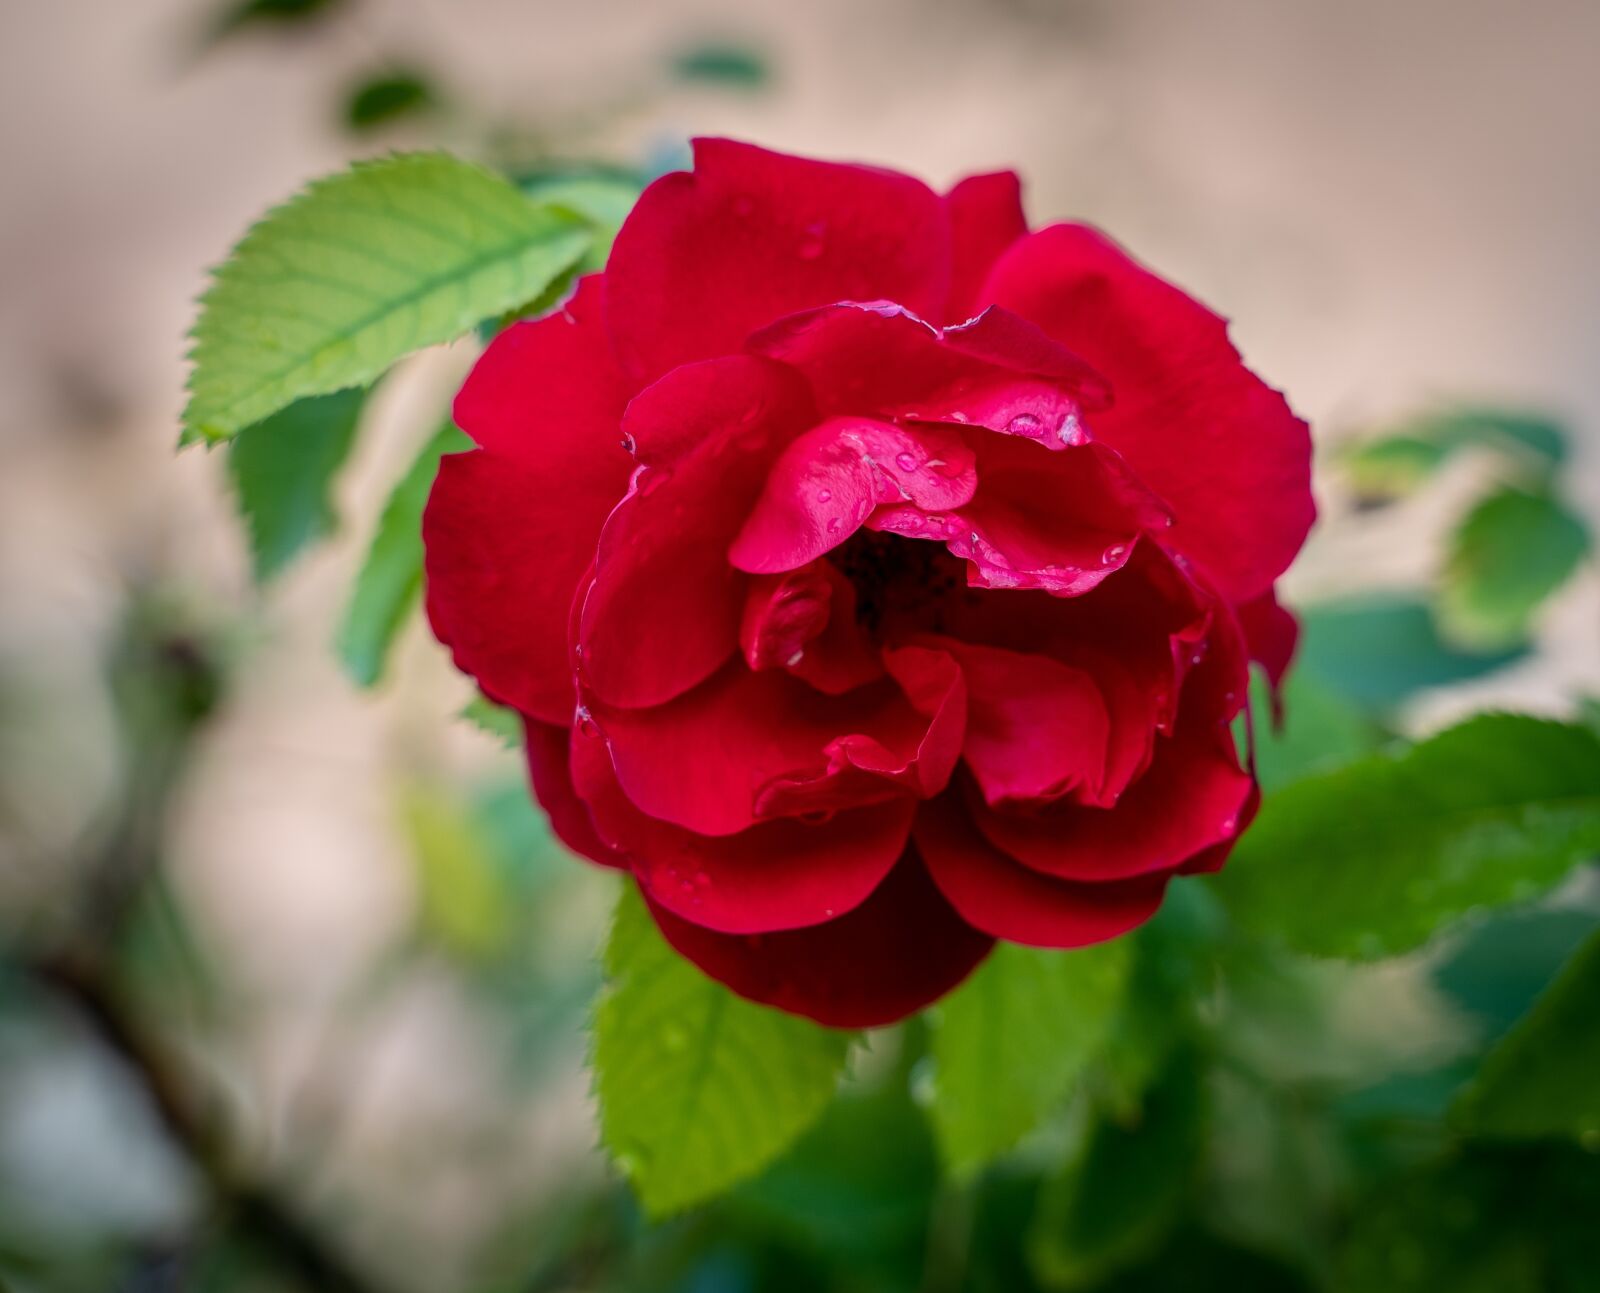 Sony a7 III sample photo. Rose, blossom, bloom photography